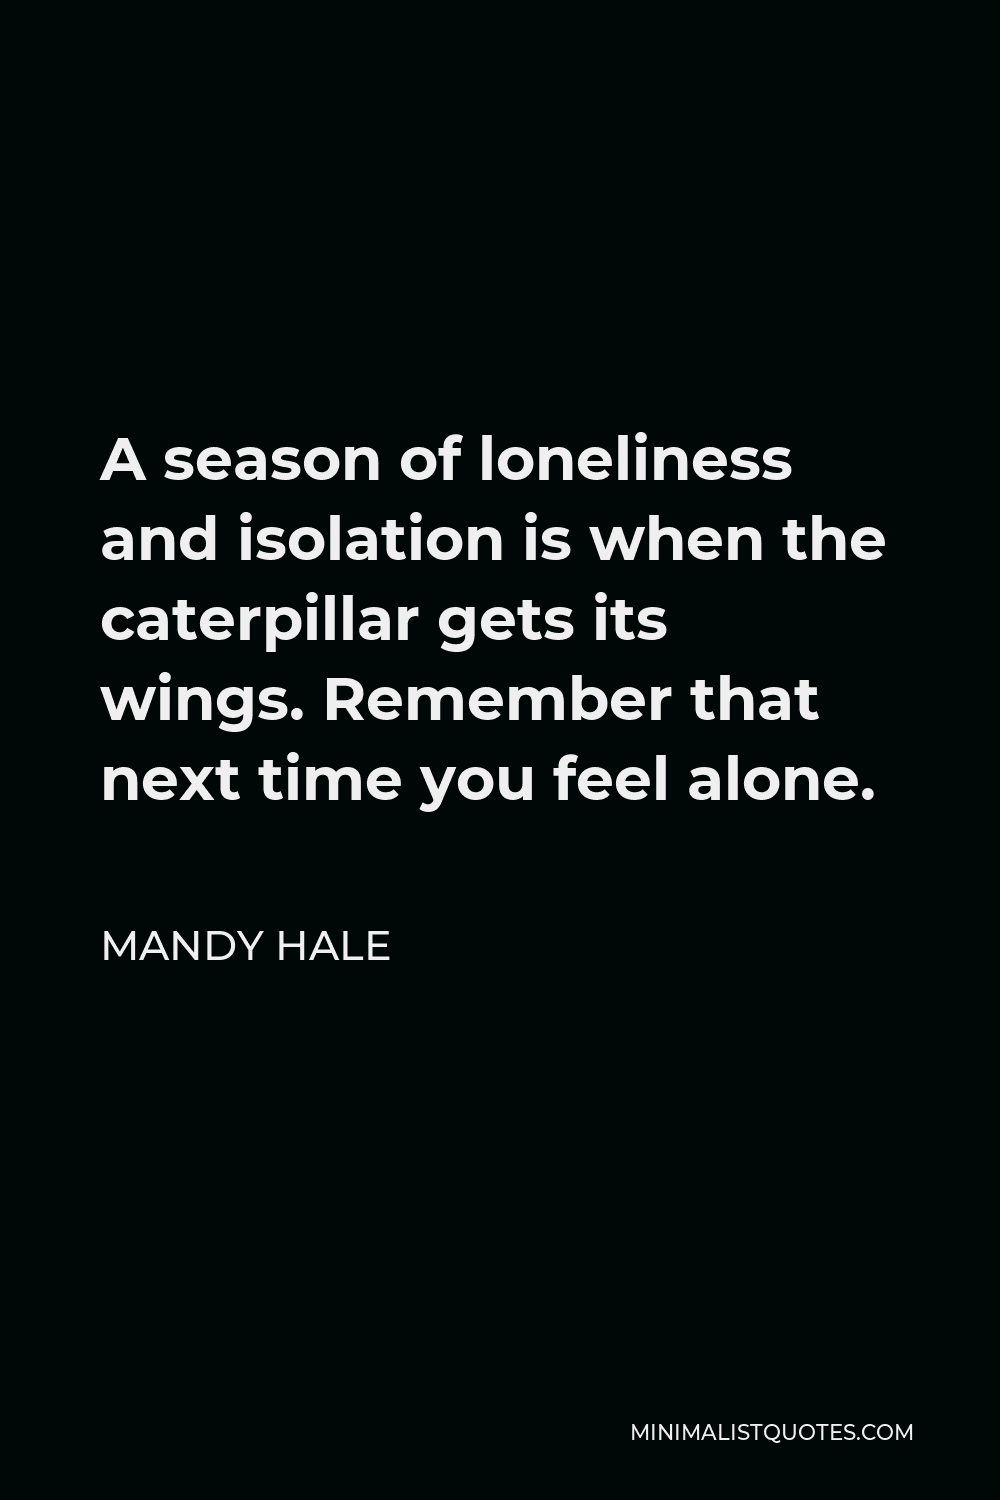 Mandy Hale Quote - A season of loneliness and isolation is when the caterpillar gets its wings. Remember that next time you feel alone.